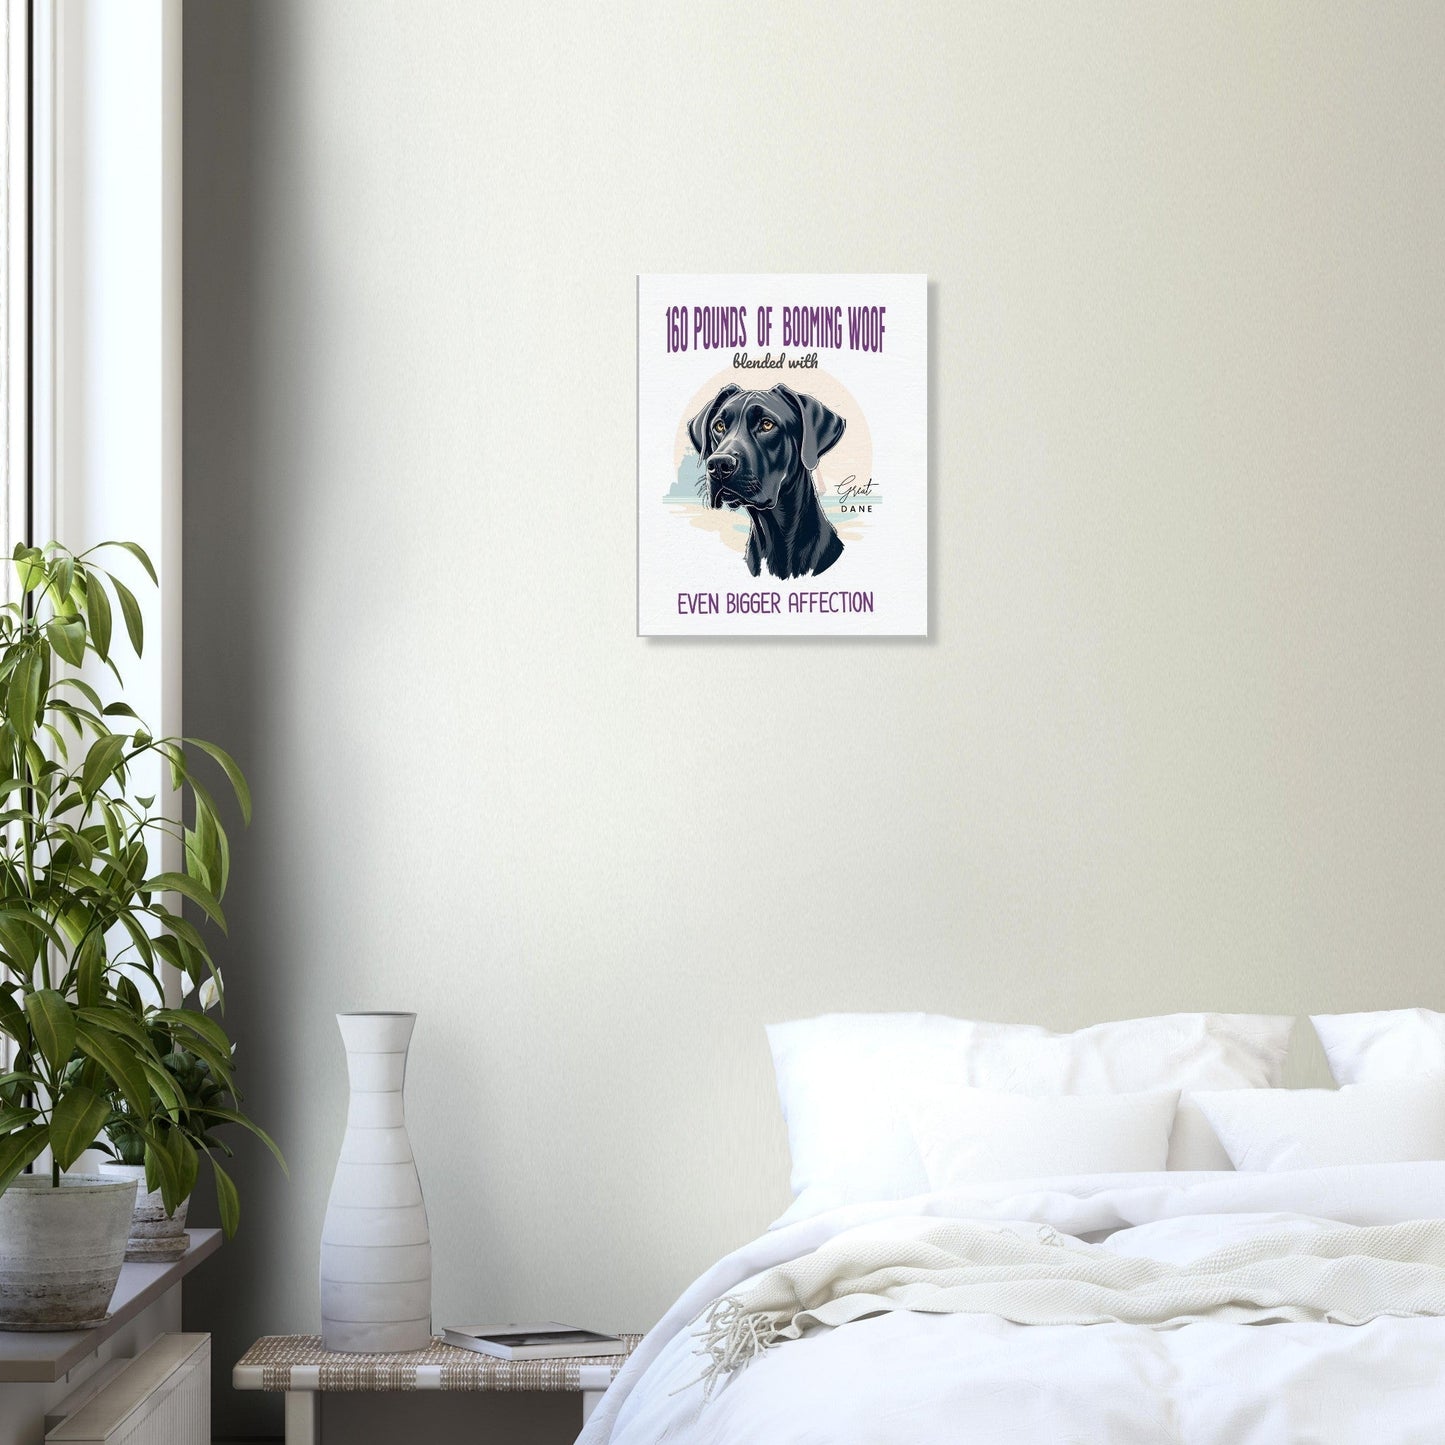 Great Dane Canvas,Great Dane gifts, Great Dane Art Print59.99-(FREE Delivery) Shop now at itsaboutmydog.com, dog canvas, Great Dane art print, Great Dane Canvas, Great Dane dad, Great Dane Dog, great dane dog gift, Great Dane dog print, Great Dane gifts, Great Dane Lover, great dane mom gift, great dane print, Great Dane wall art